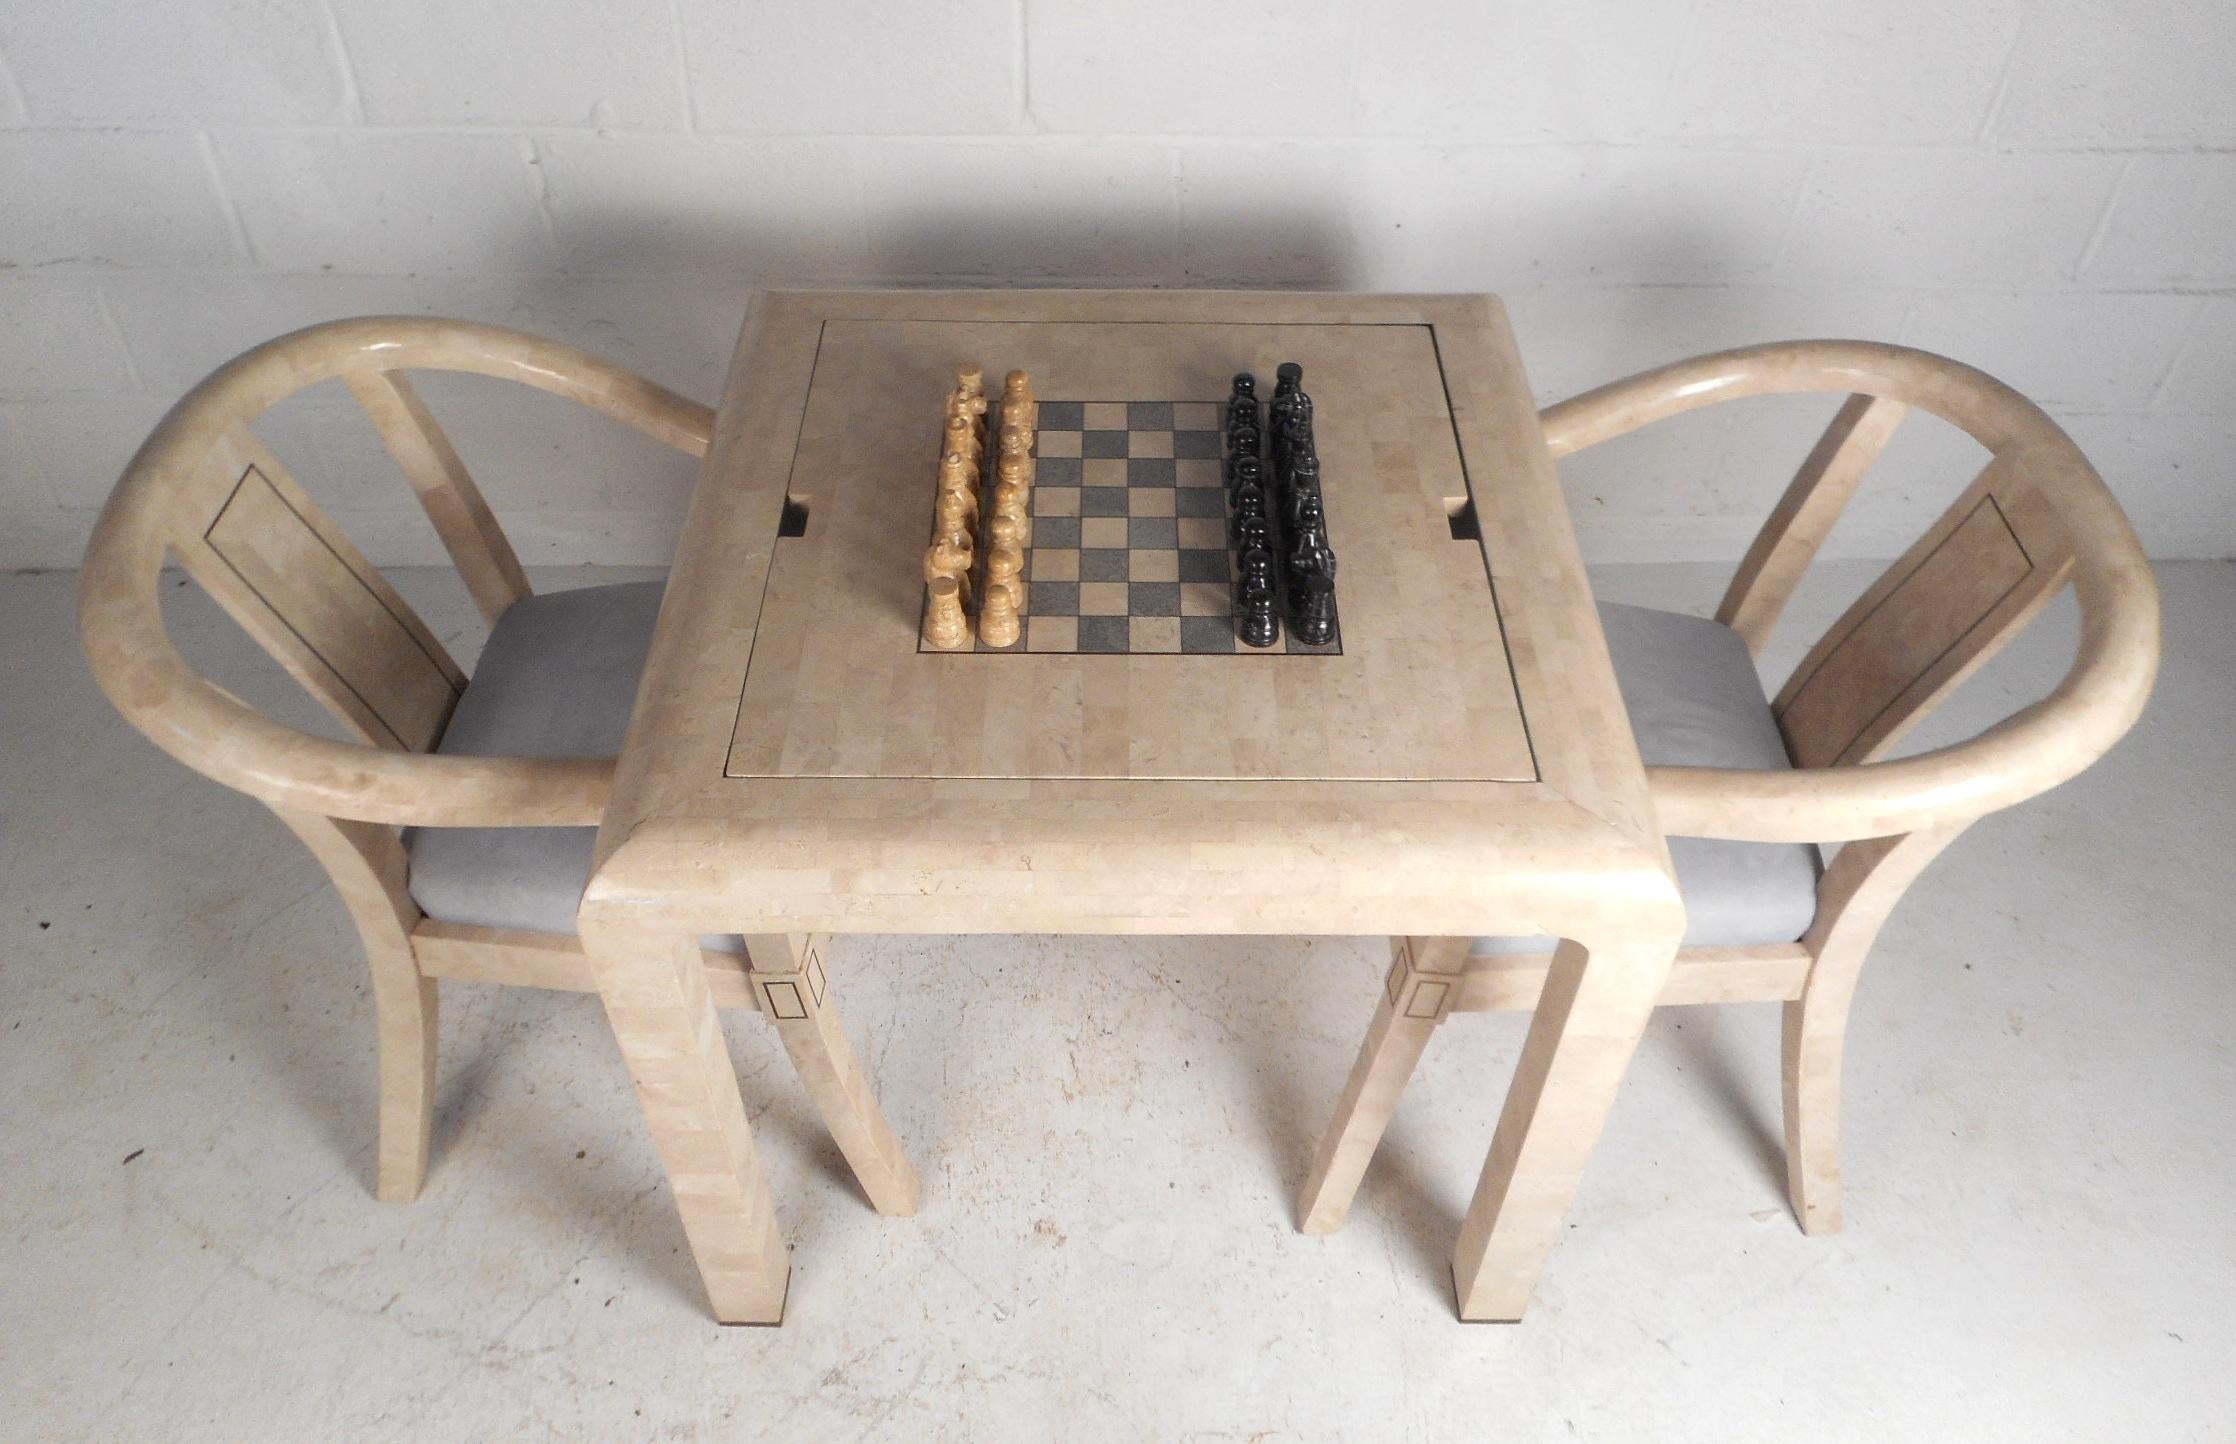 This stunning Mid-Century Modern game table features a reversible top with a backgammon board underneath and lovely brass inlays throughout. A versatile design with one side being tessellated stone and the other functions as a chessboard. This